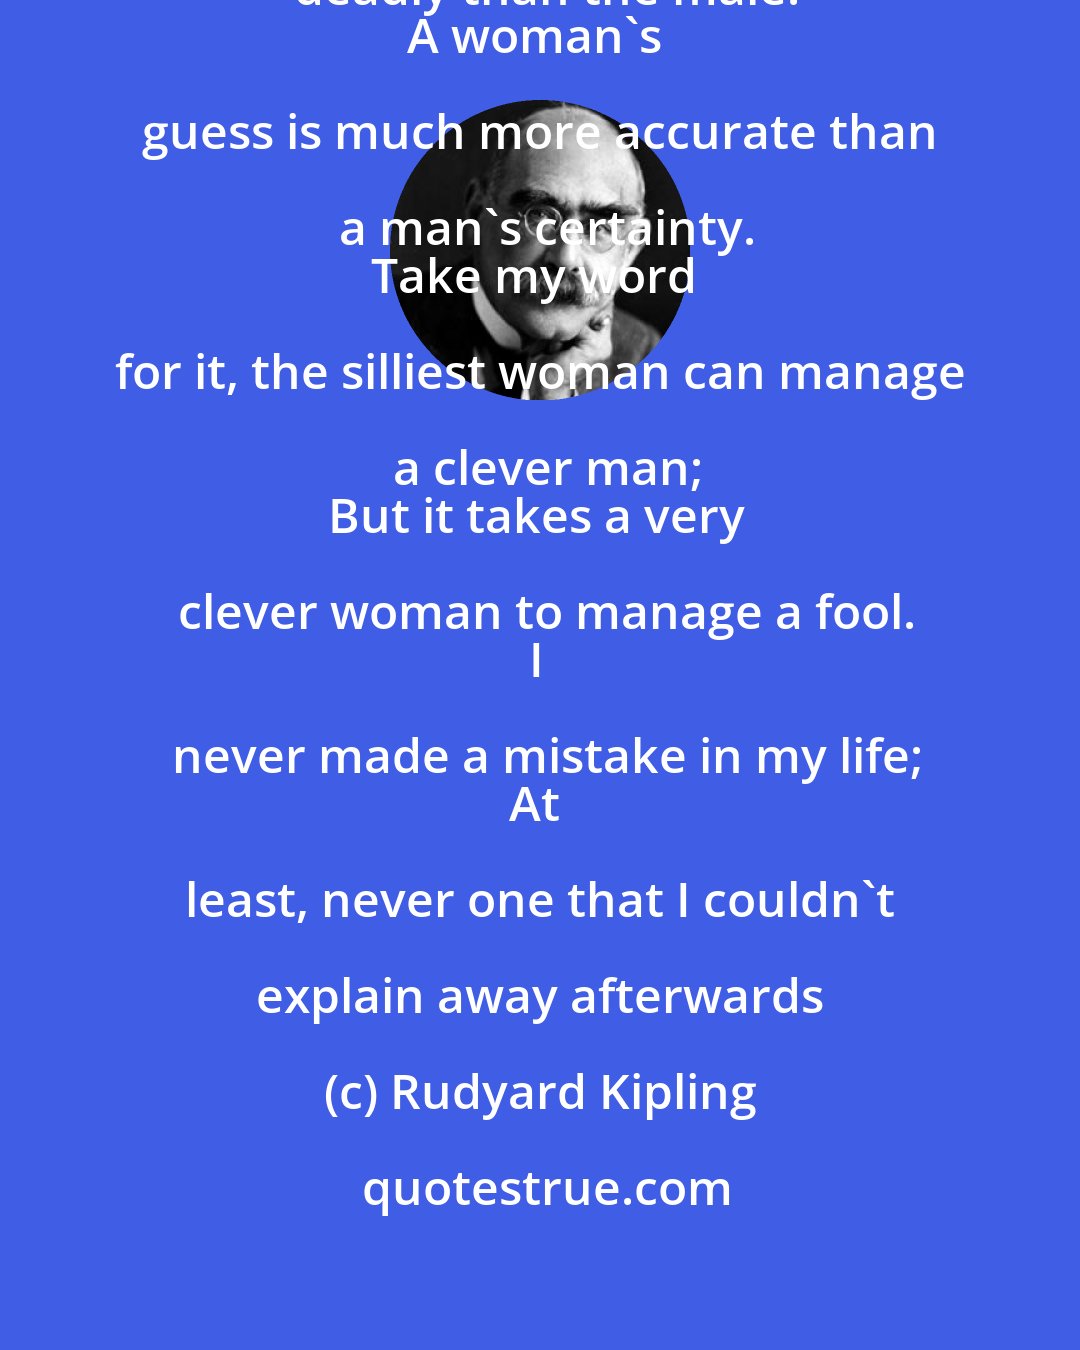 Rudyard Kipling: For the female of the species is more deadly than the male.
A woman's guess is much more accurate than a man's certainty.
Take my word for it, the silliest woman can manage a clever man;
But it takes a very clever woman to manage a fool.
I never made a mistake in my life;
At least, never one that I couldn't explain away afterwards